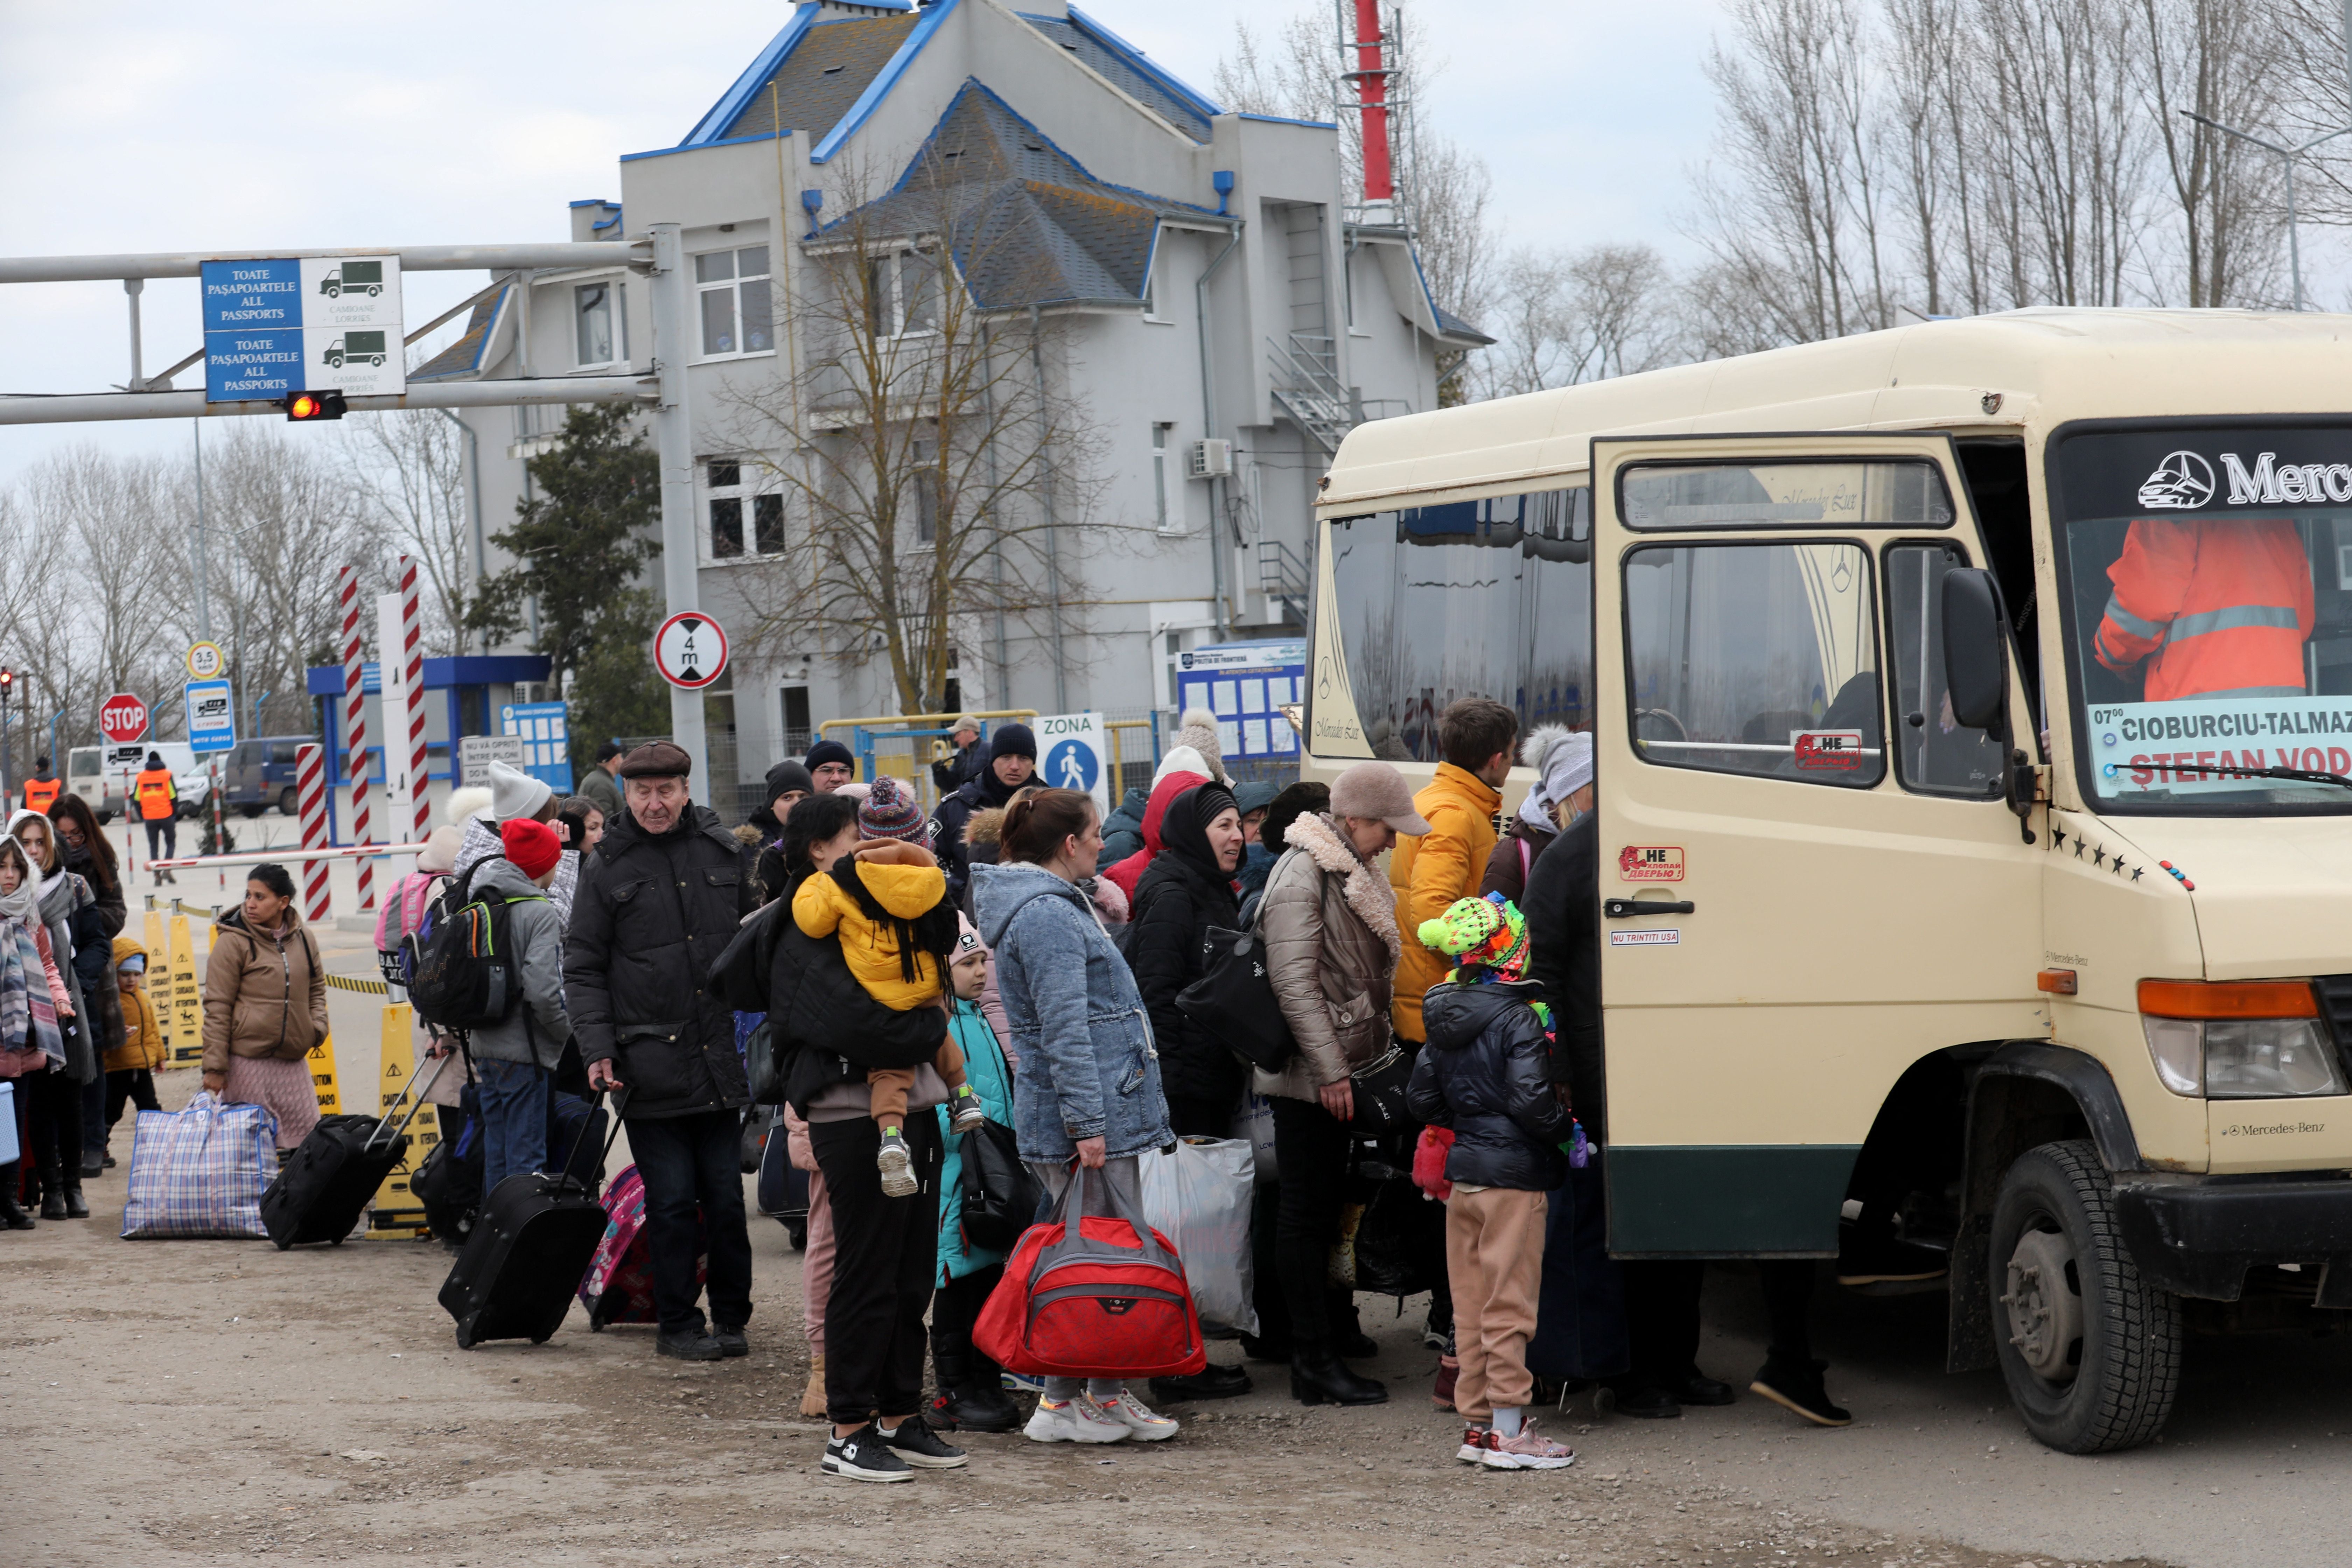 People fleeing Russia’s invasion board a bus near the village of Palanka, Moldova, 14 March 2022